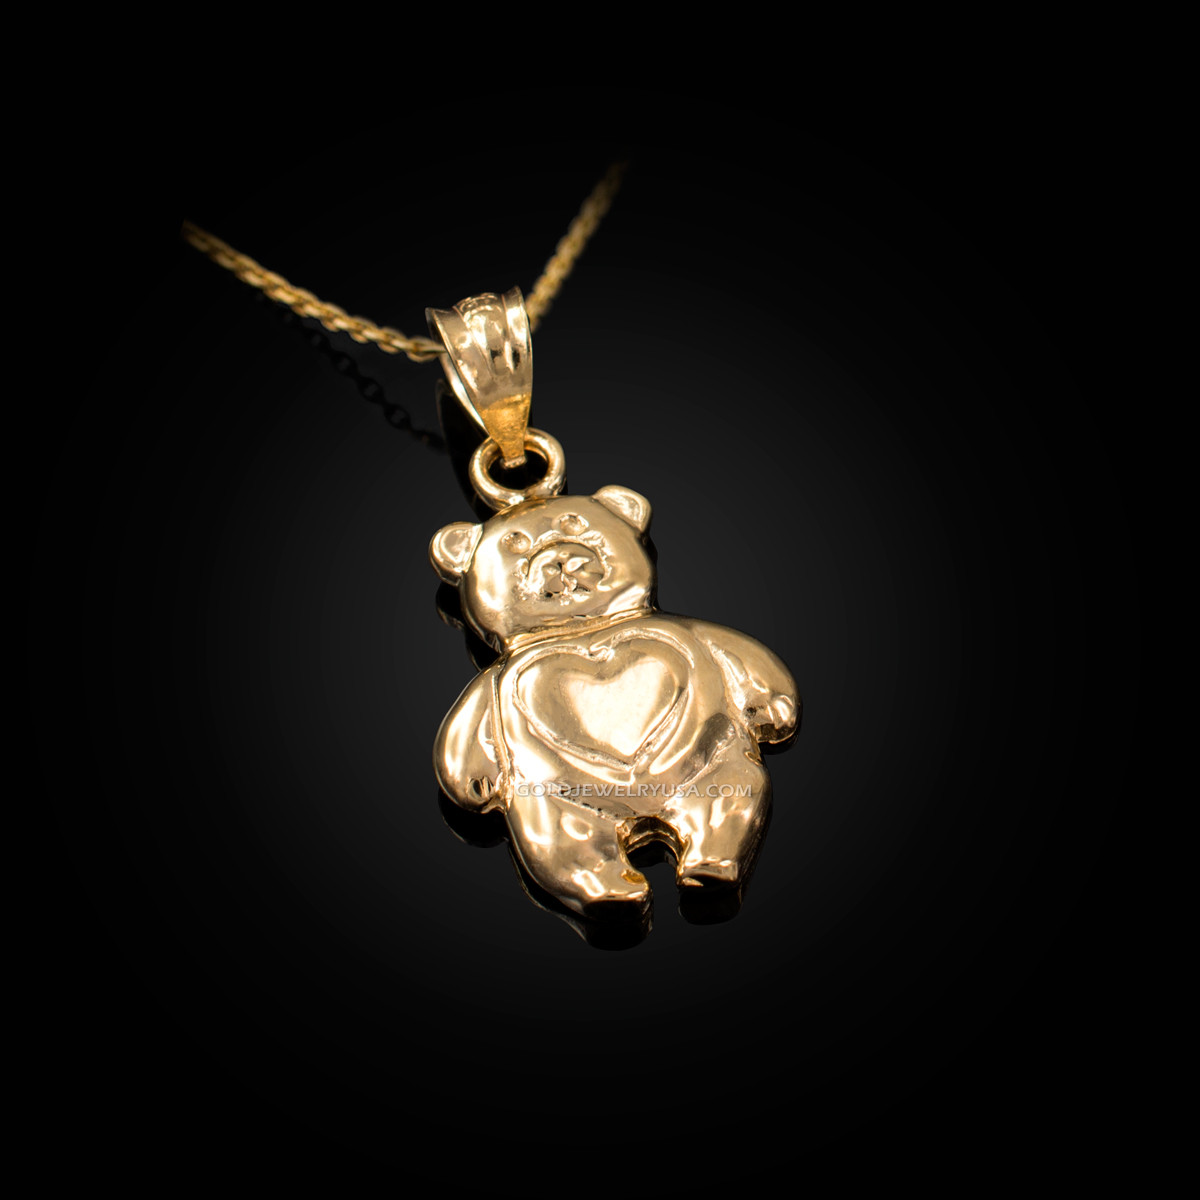 Gold Teddy Bear Pendant Necklace, Vintage Teddy Bear Charm Necklace,  Minimalist Jewelry, Gold Plated Stainless Steel Chain, Gift for Her - Etsy  | Bear pendant, Beautiful gold chain, Fancy jewelry necklace